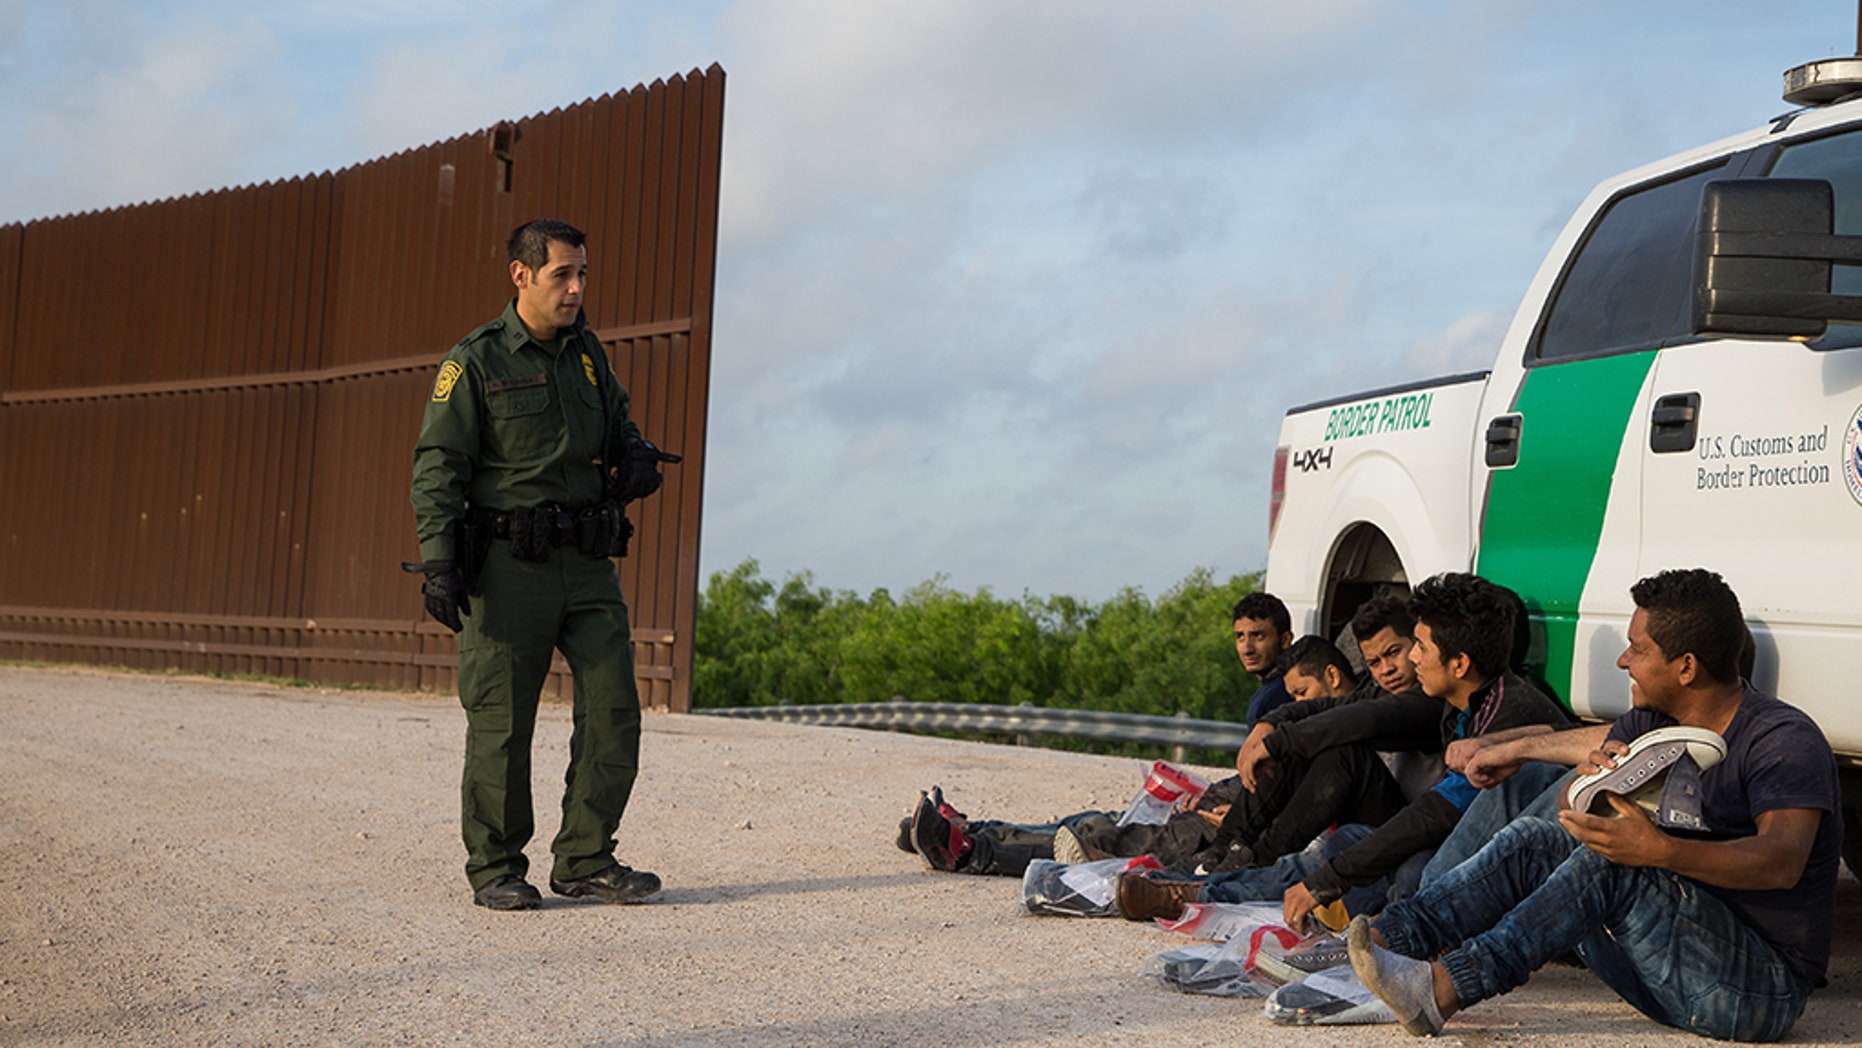 Border Agents Arrest Over 400 Illegals In 2 Days As Agency Announces Record Month For 